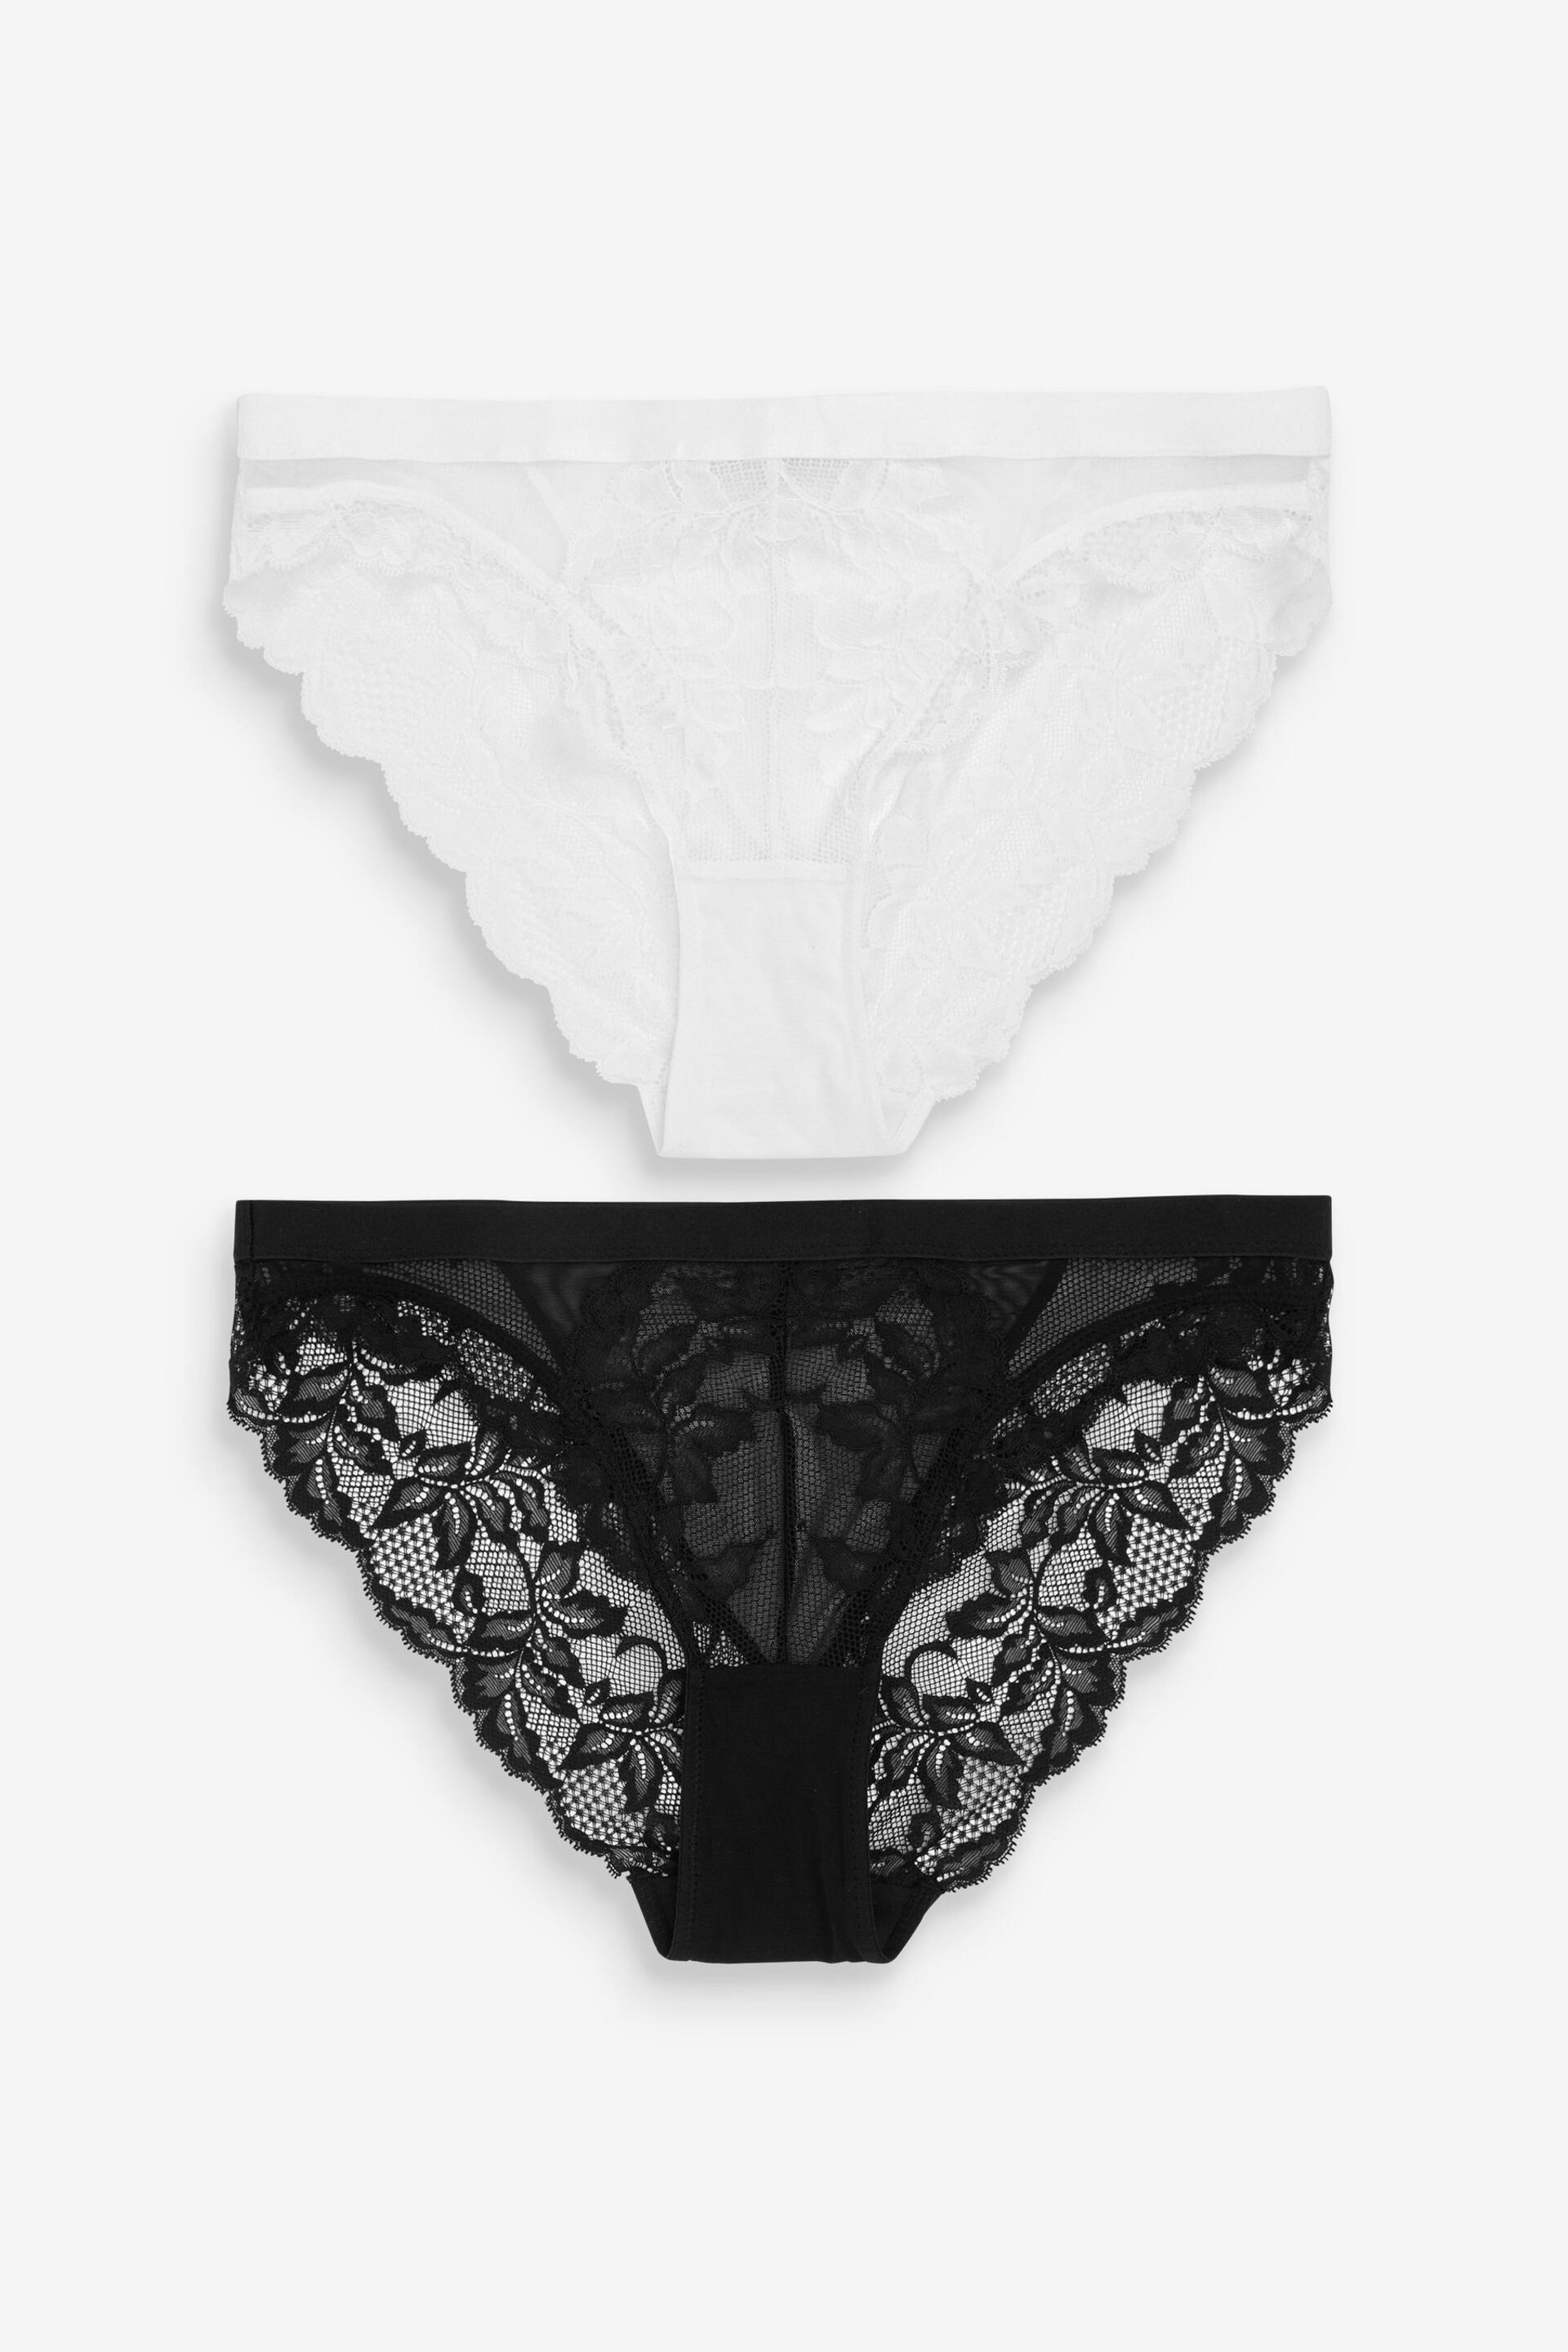 Black/White High Leg Lace Knickers 2 Pack - Image 1 of 7